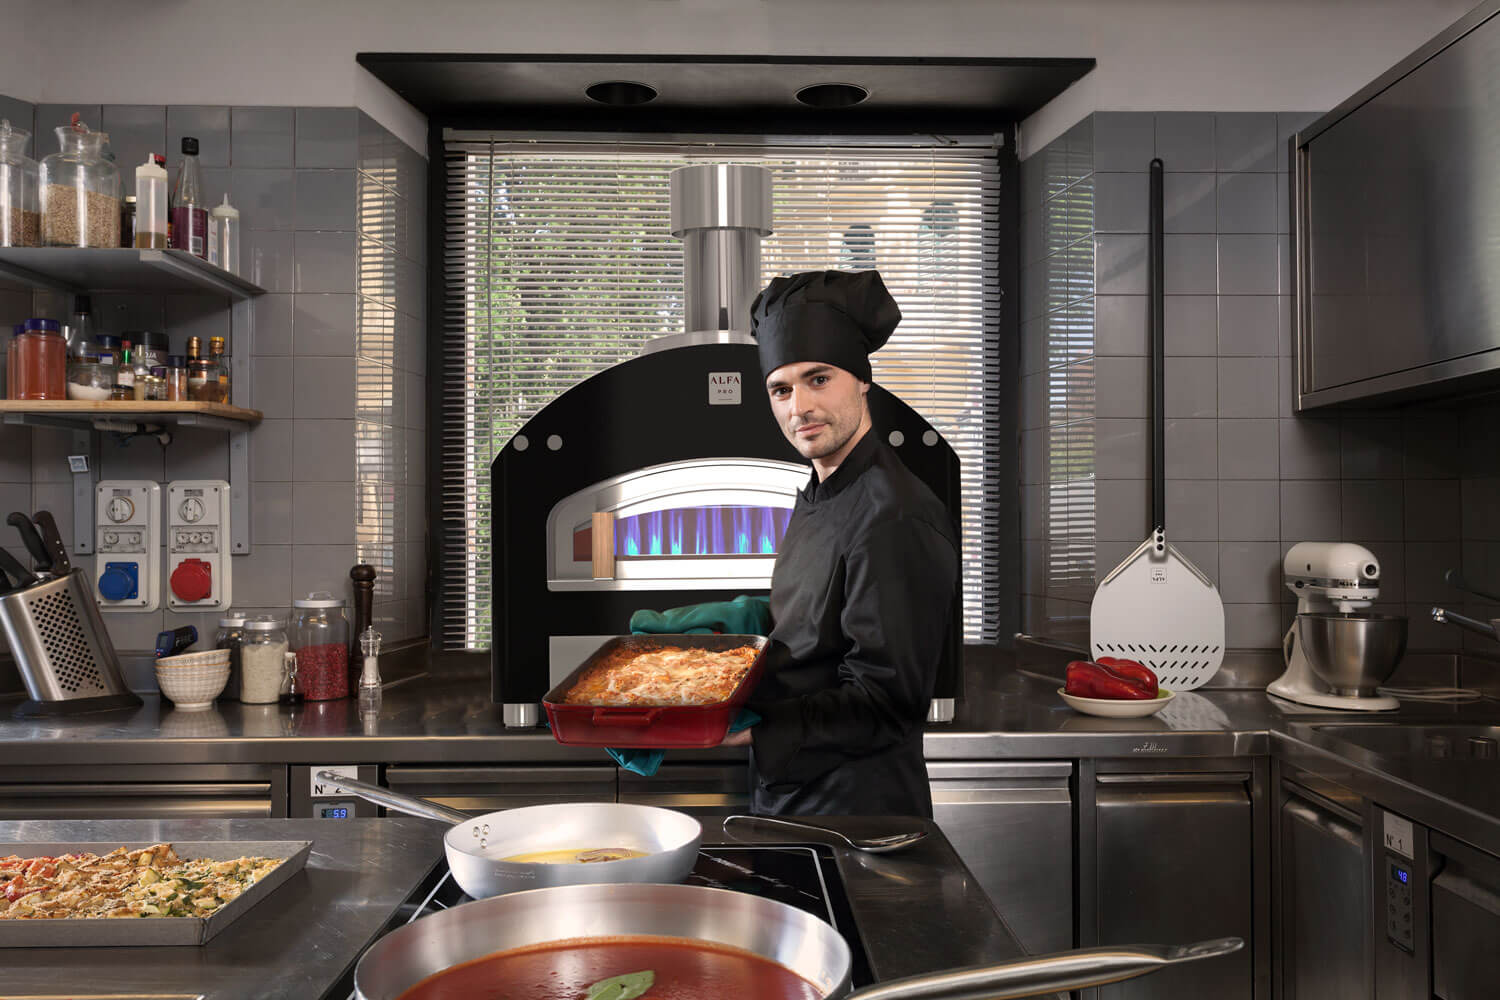 Get more space in your restaurant with small pizza ovens or built-in ovens.